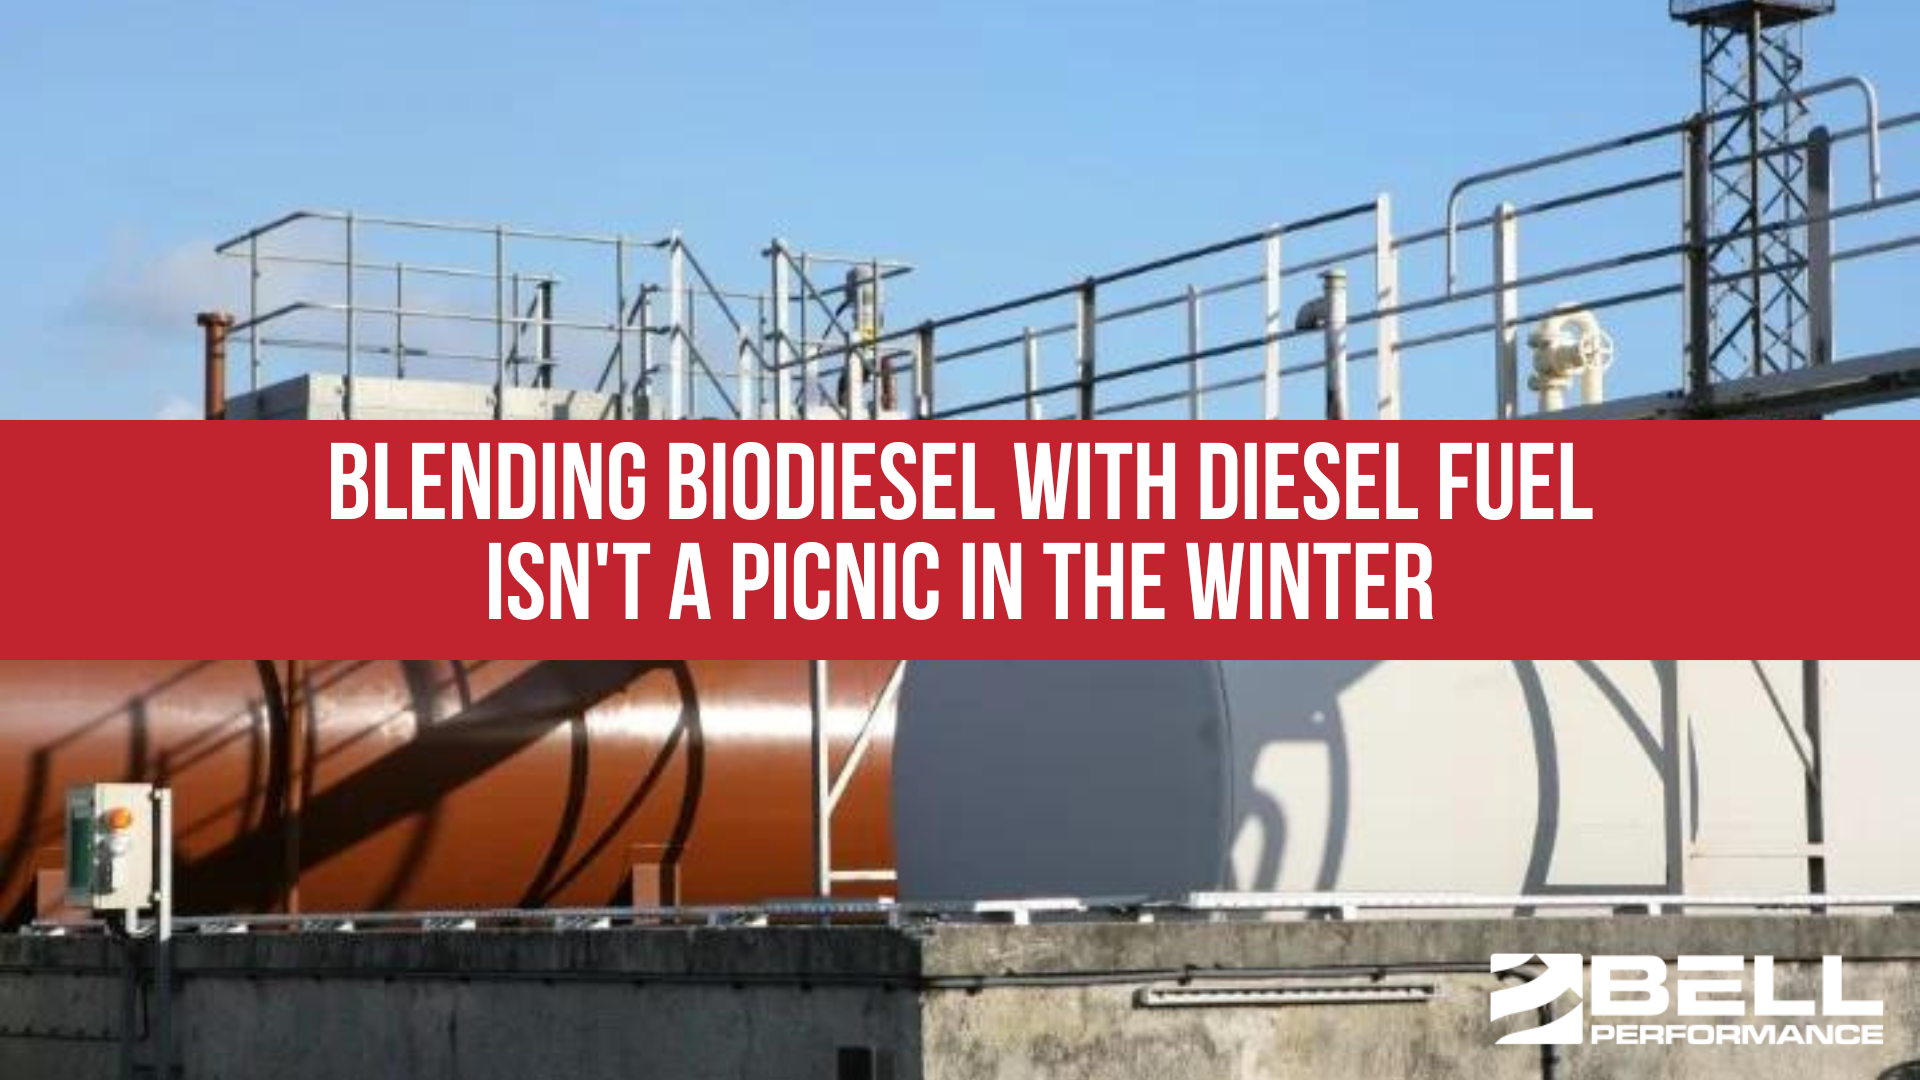 Blending Biodiesel with Diesel Fuel Isn't a Picnic in the Winter